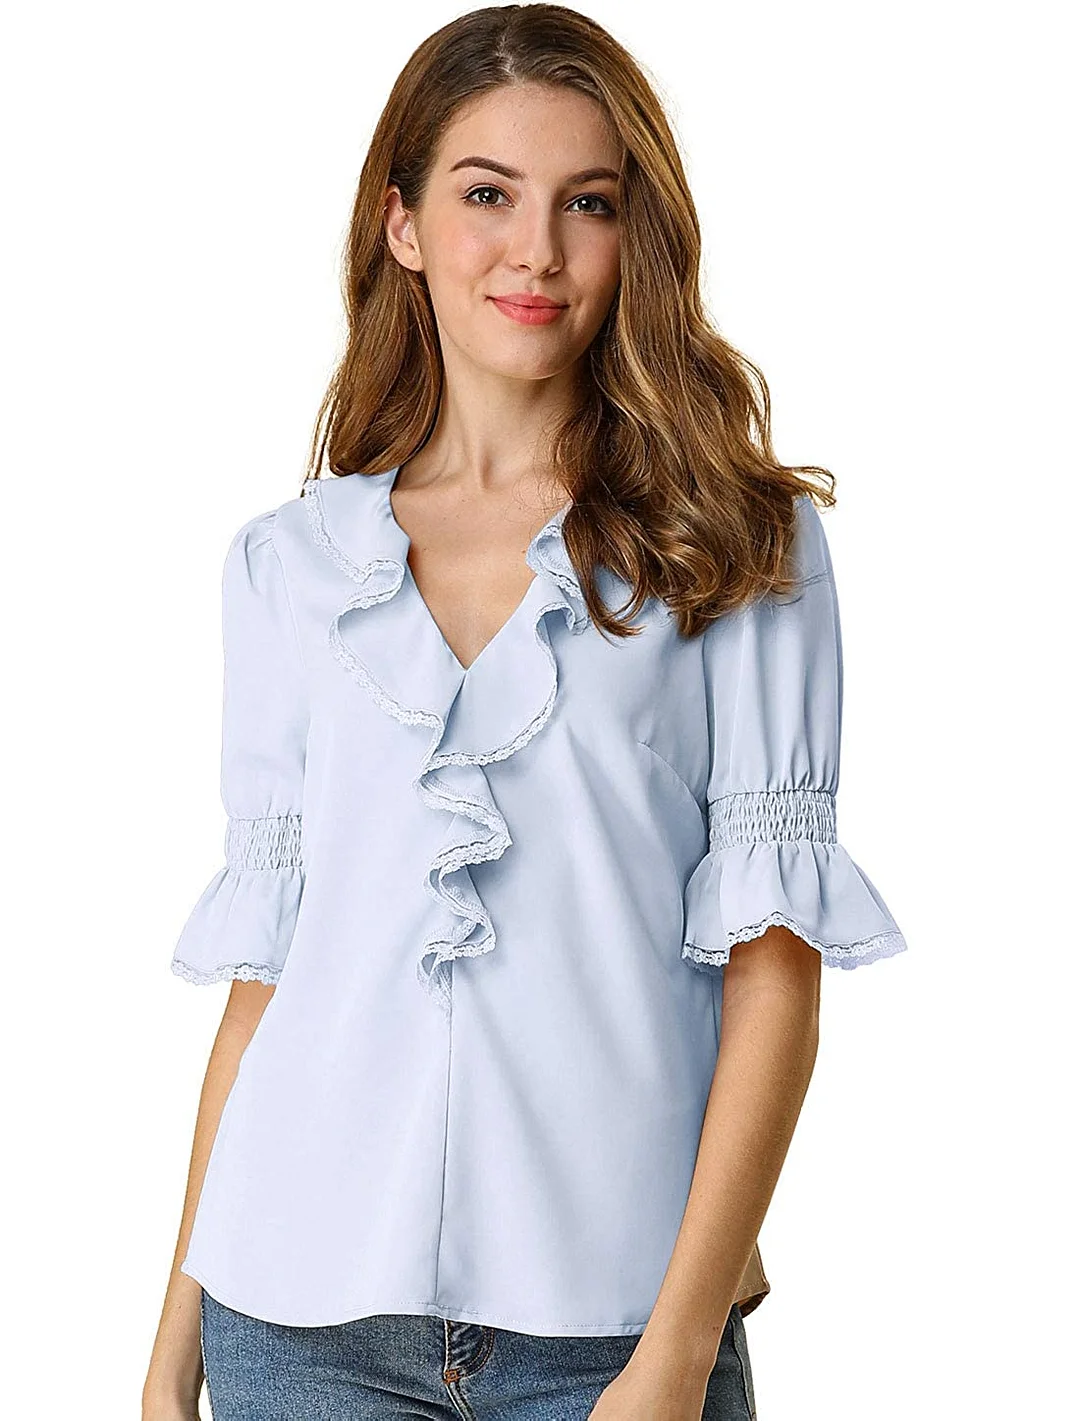 Women's Ruffle V Neck Half Bell Sleeve Blouse Summer Vintage Casual Chiffon Peasant Top